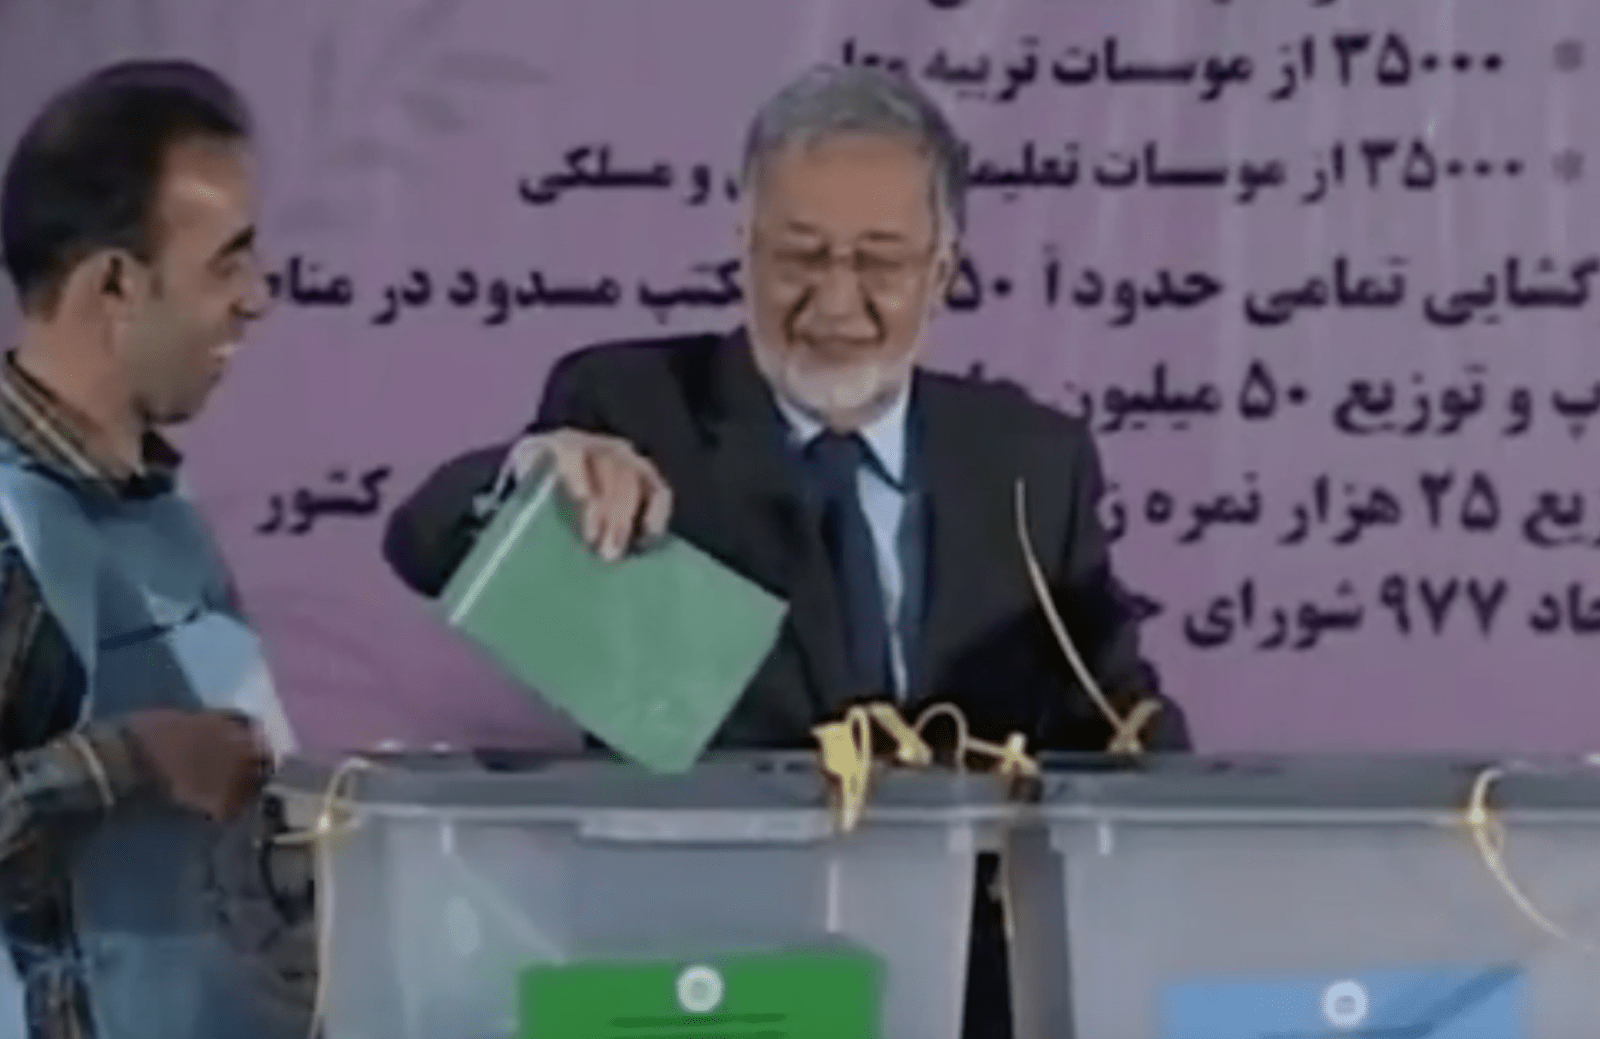 Democracy and Presidential Elections 2019: Conflict Resolution in Afghanistan